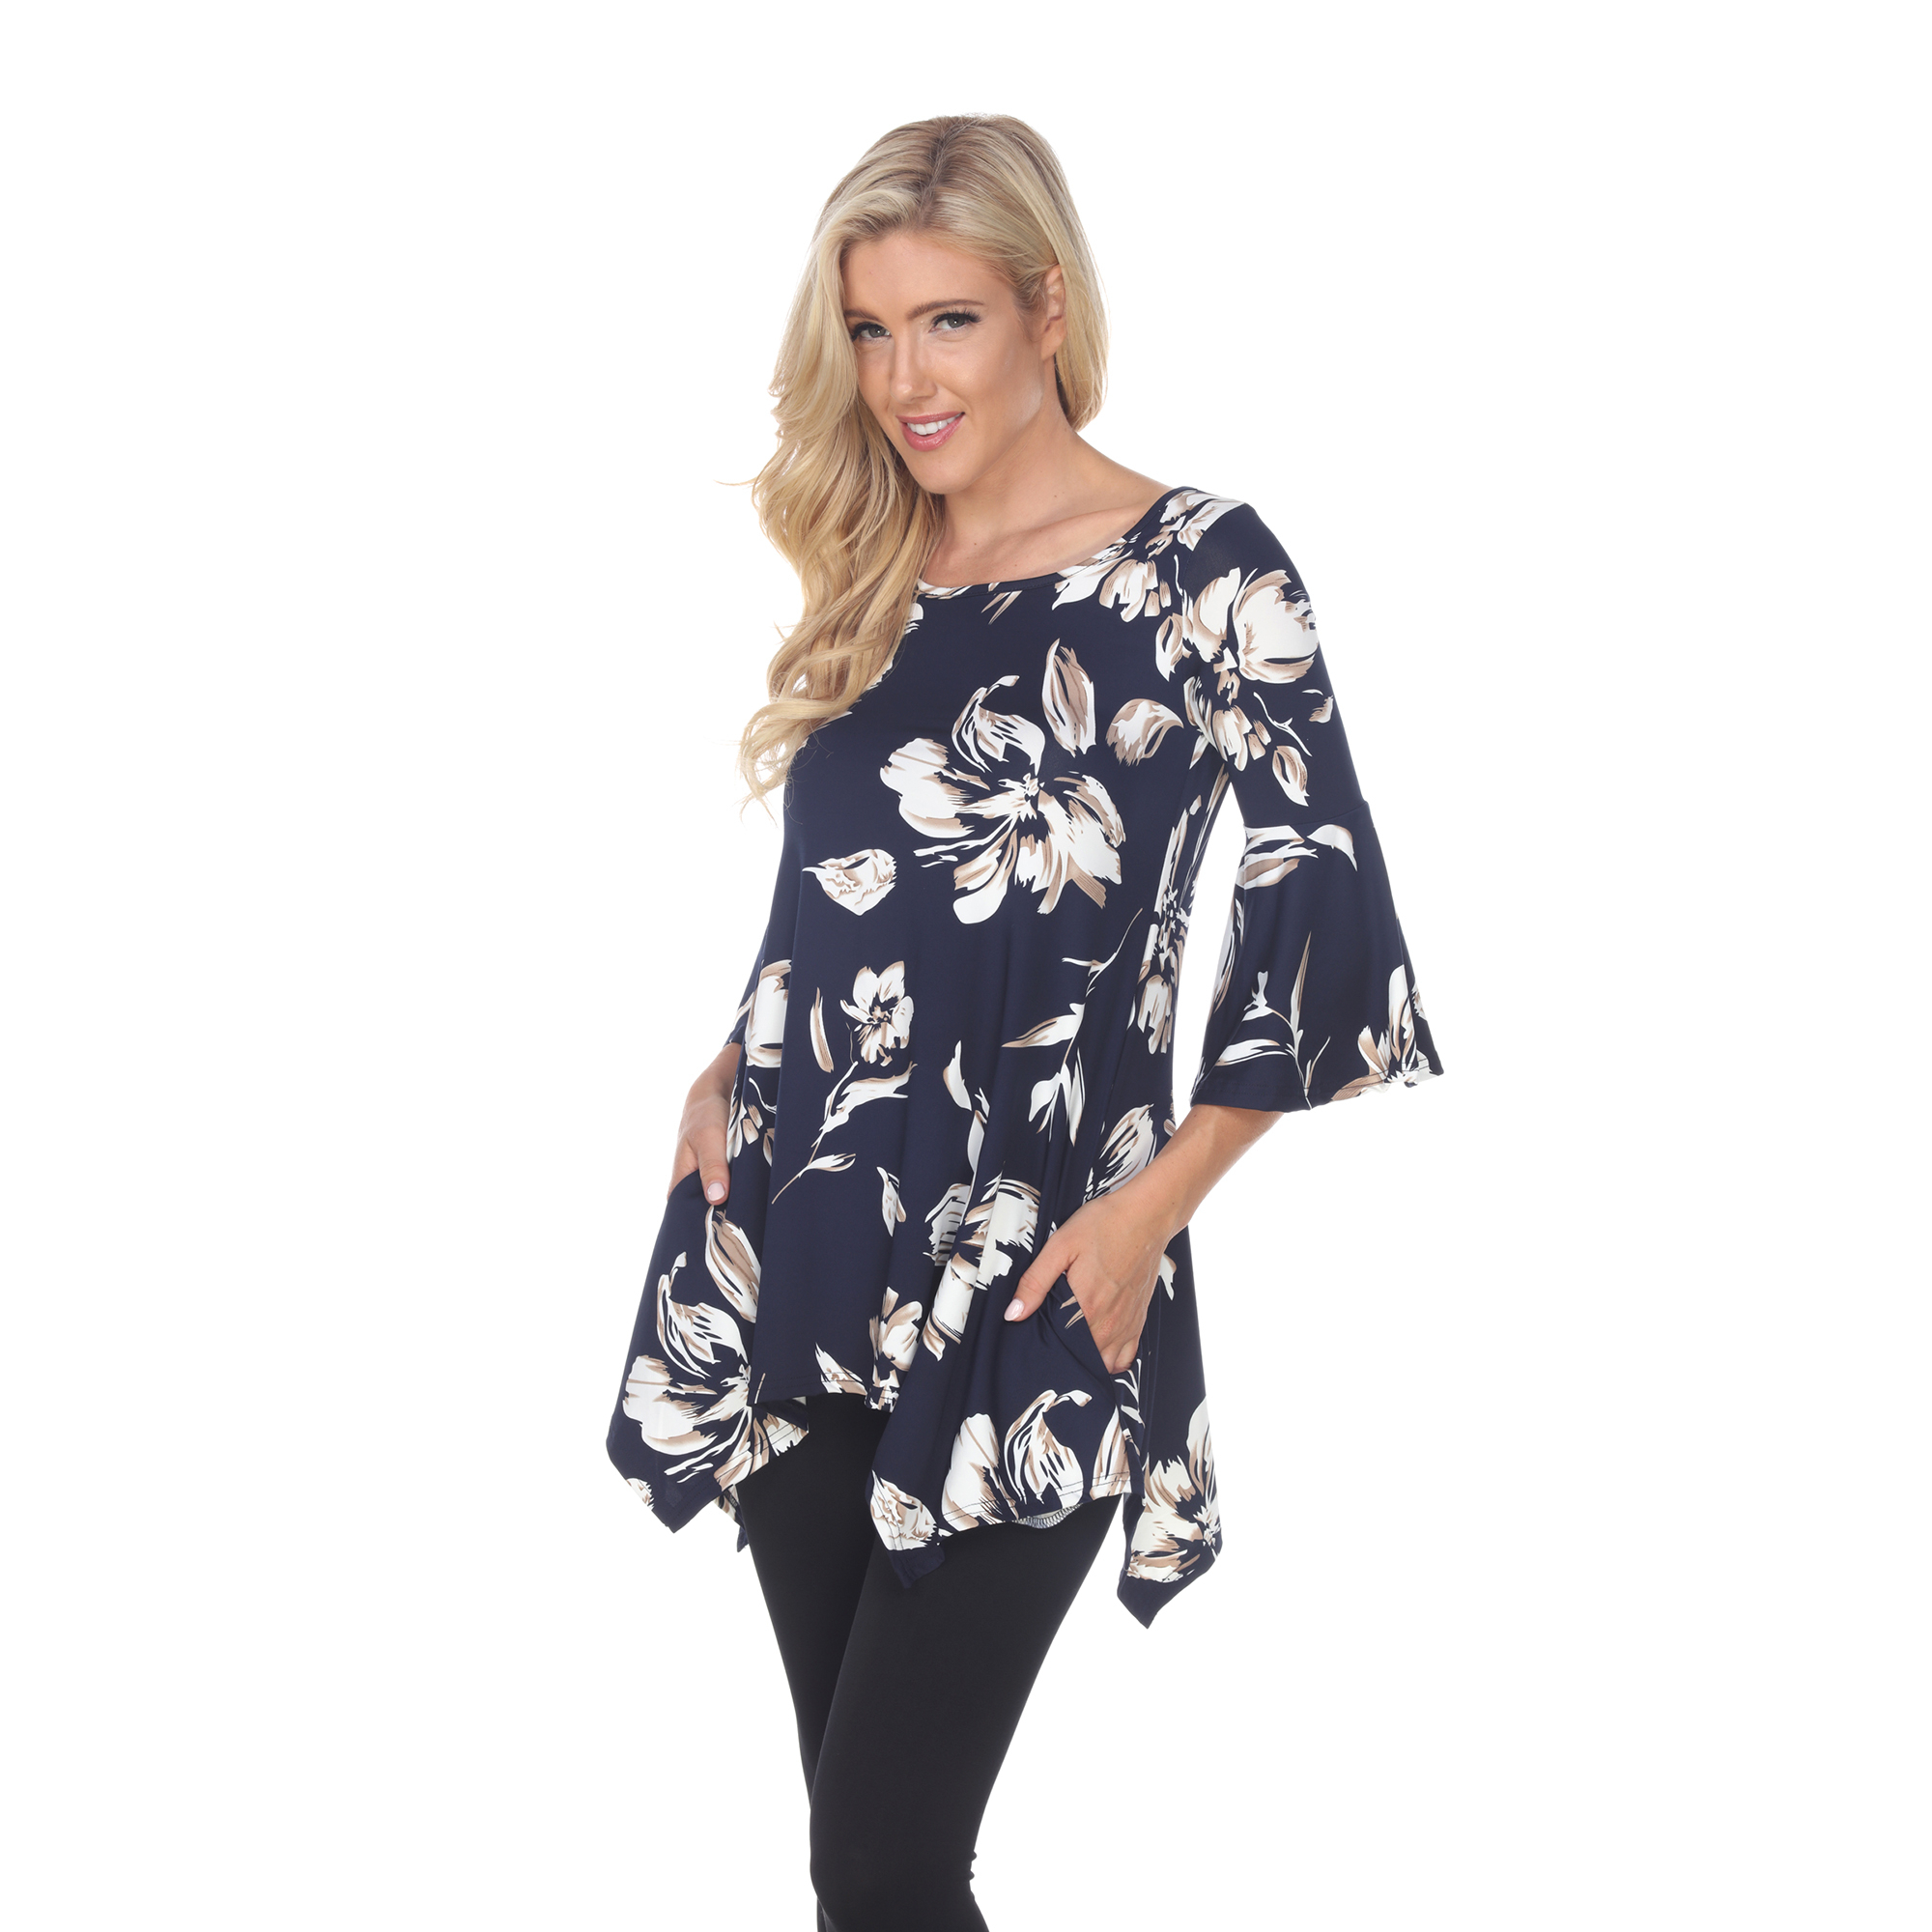 White Mark Women's Floral Print Quarter Sleeve Tunic Top With Pockets - Black, Large